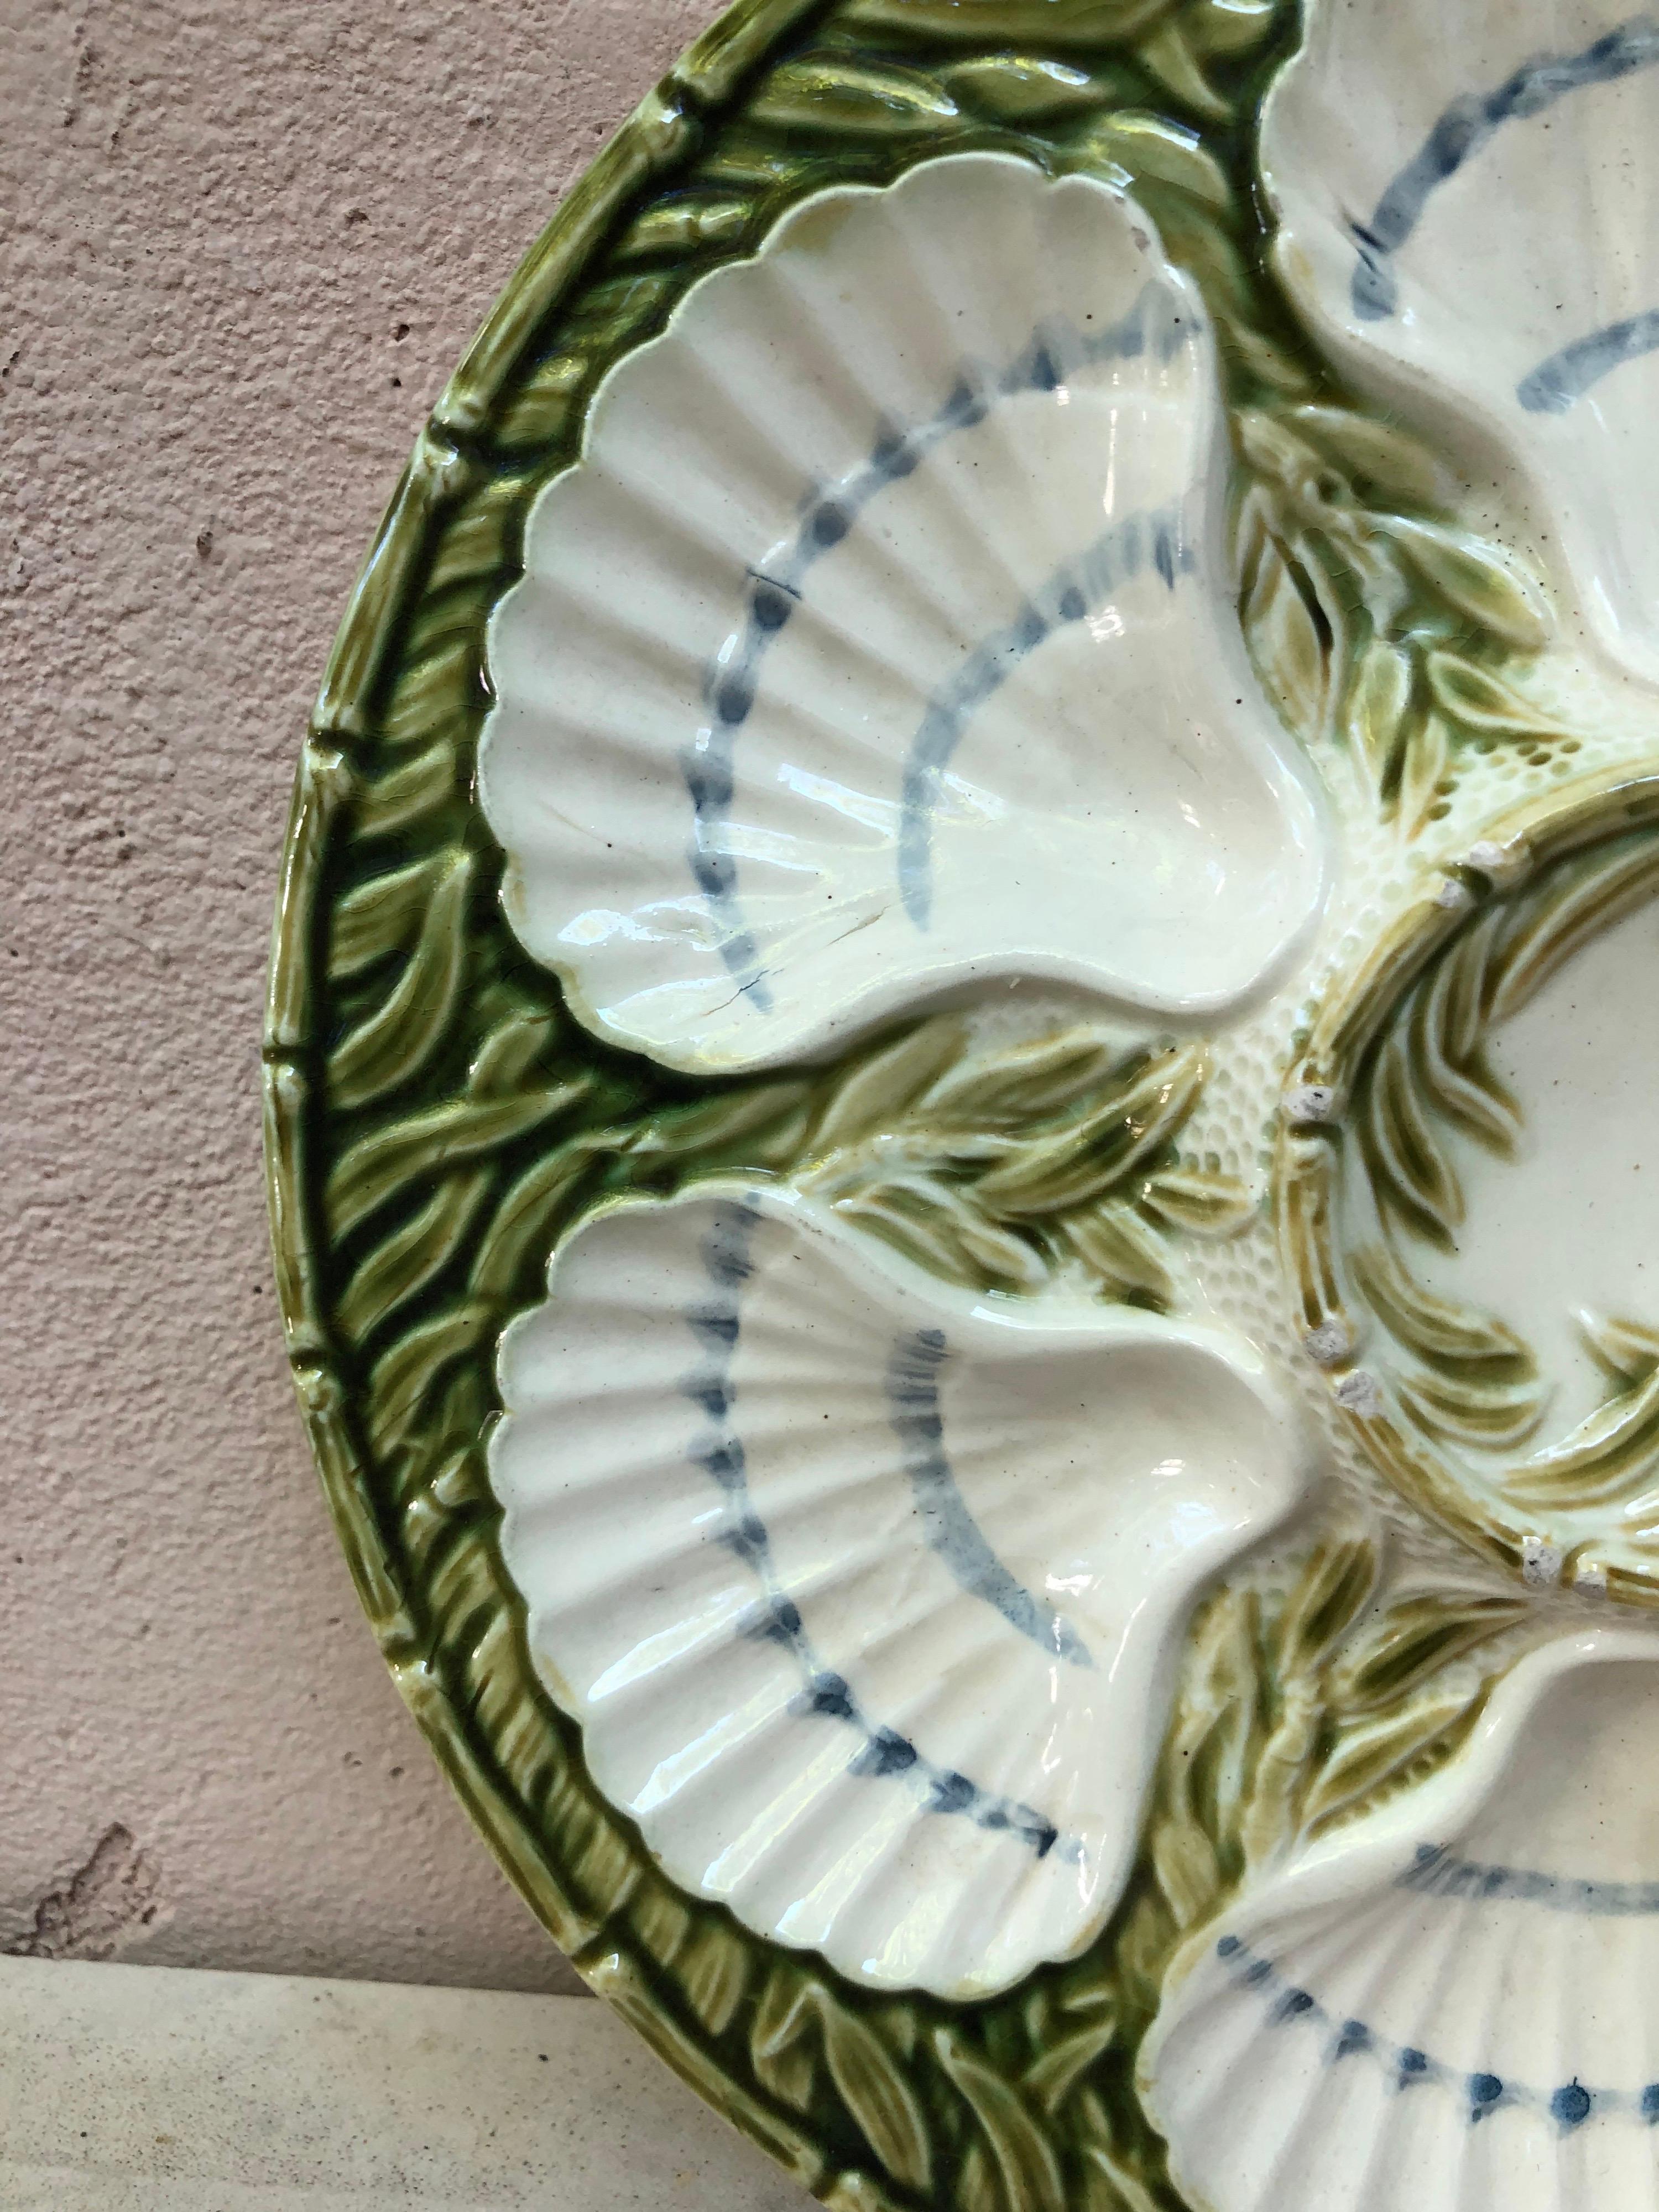 French Majolica oyster plate with seaweeds from the manufacture of Salins, circa 1890.